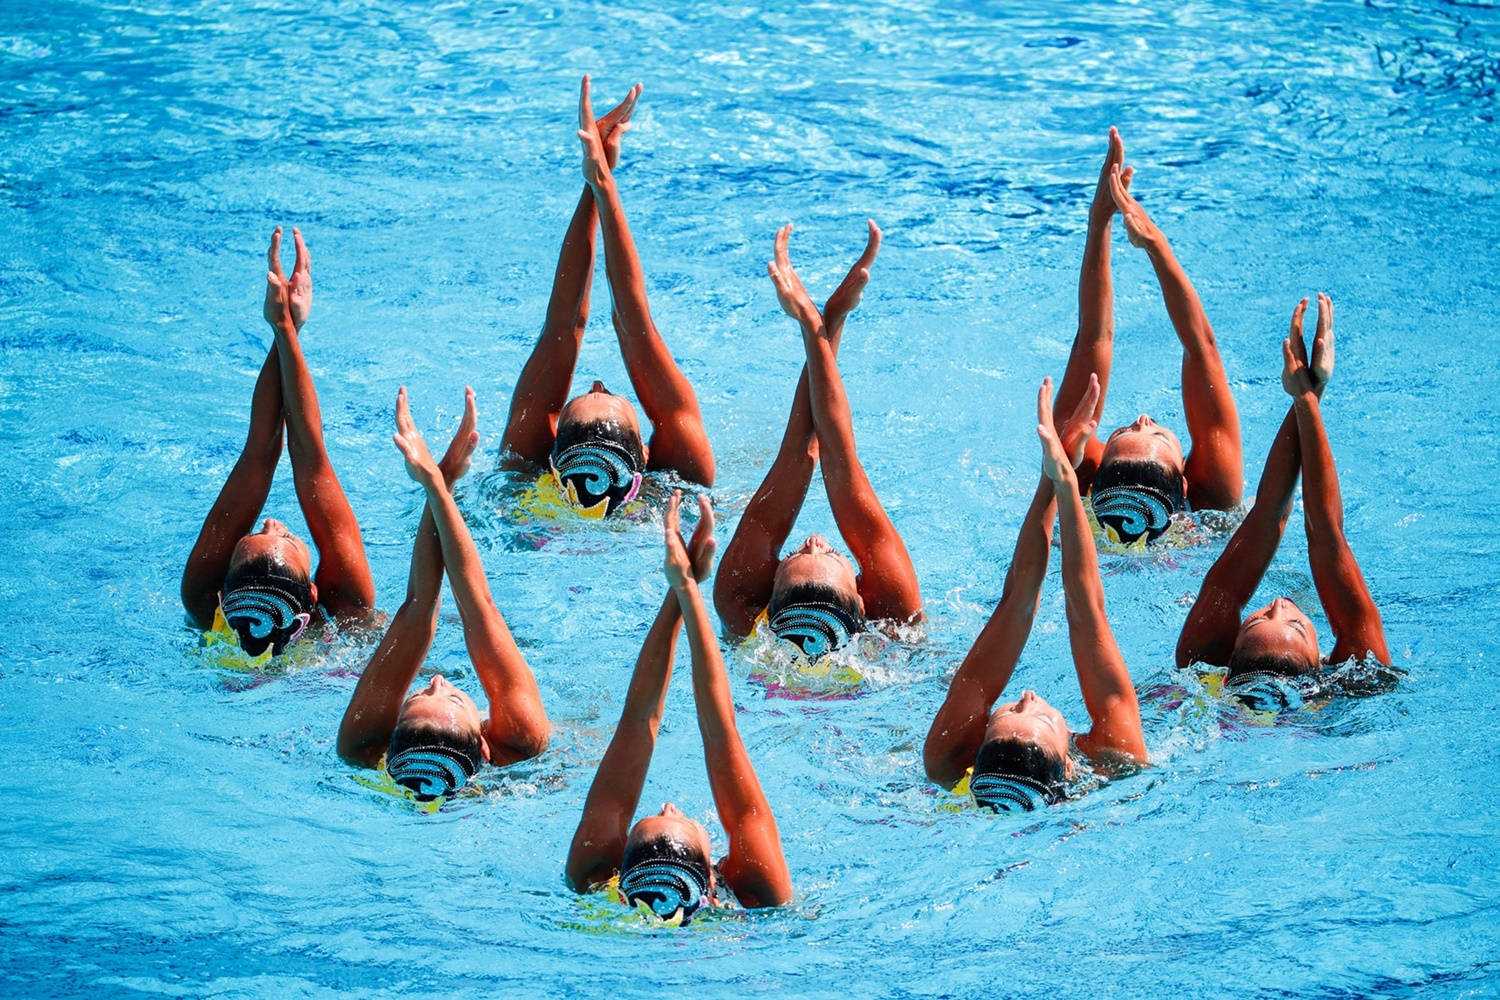 Japanese synchronized swimming team performing intricate routine Wallpaper